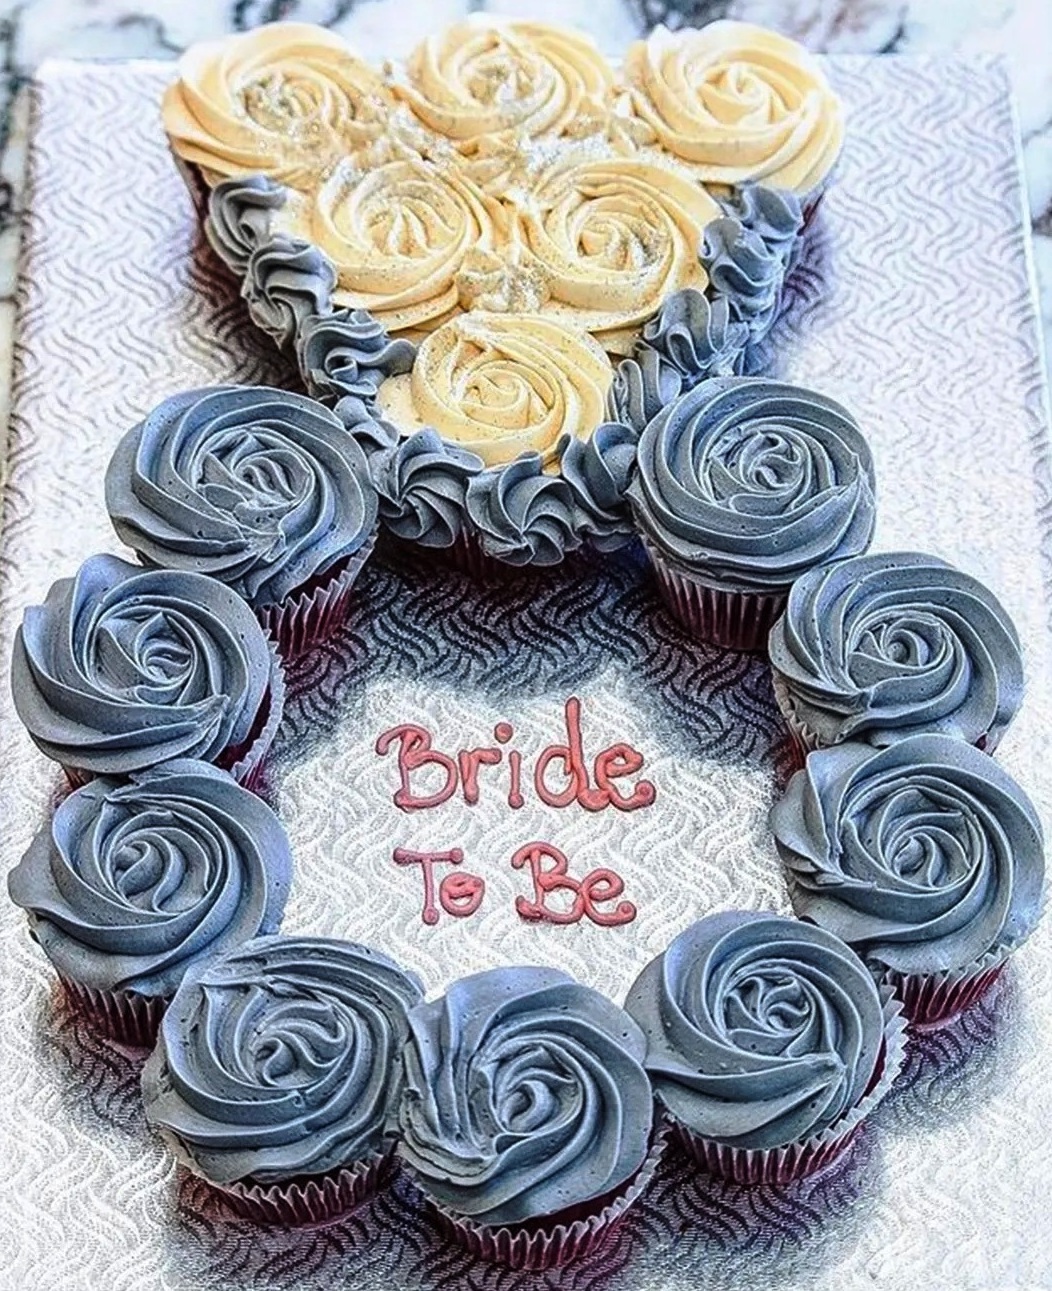 Divina - Ring box cake for an Engagement Ceremony... | Facebook